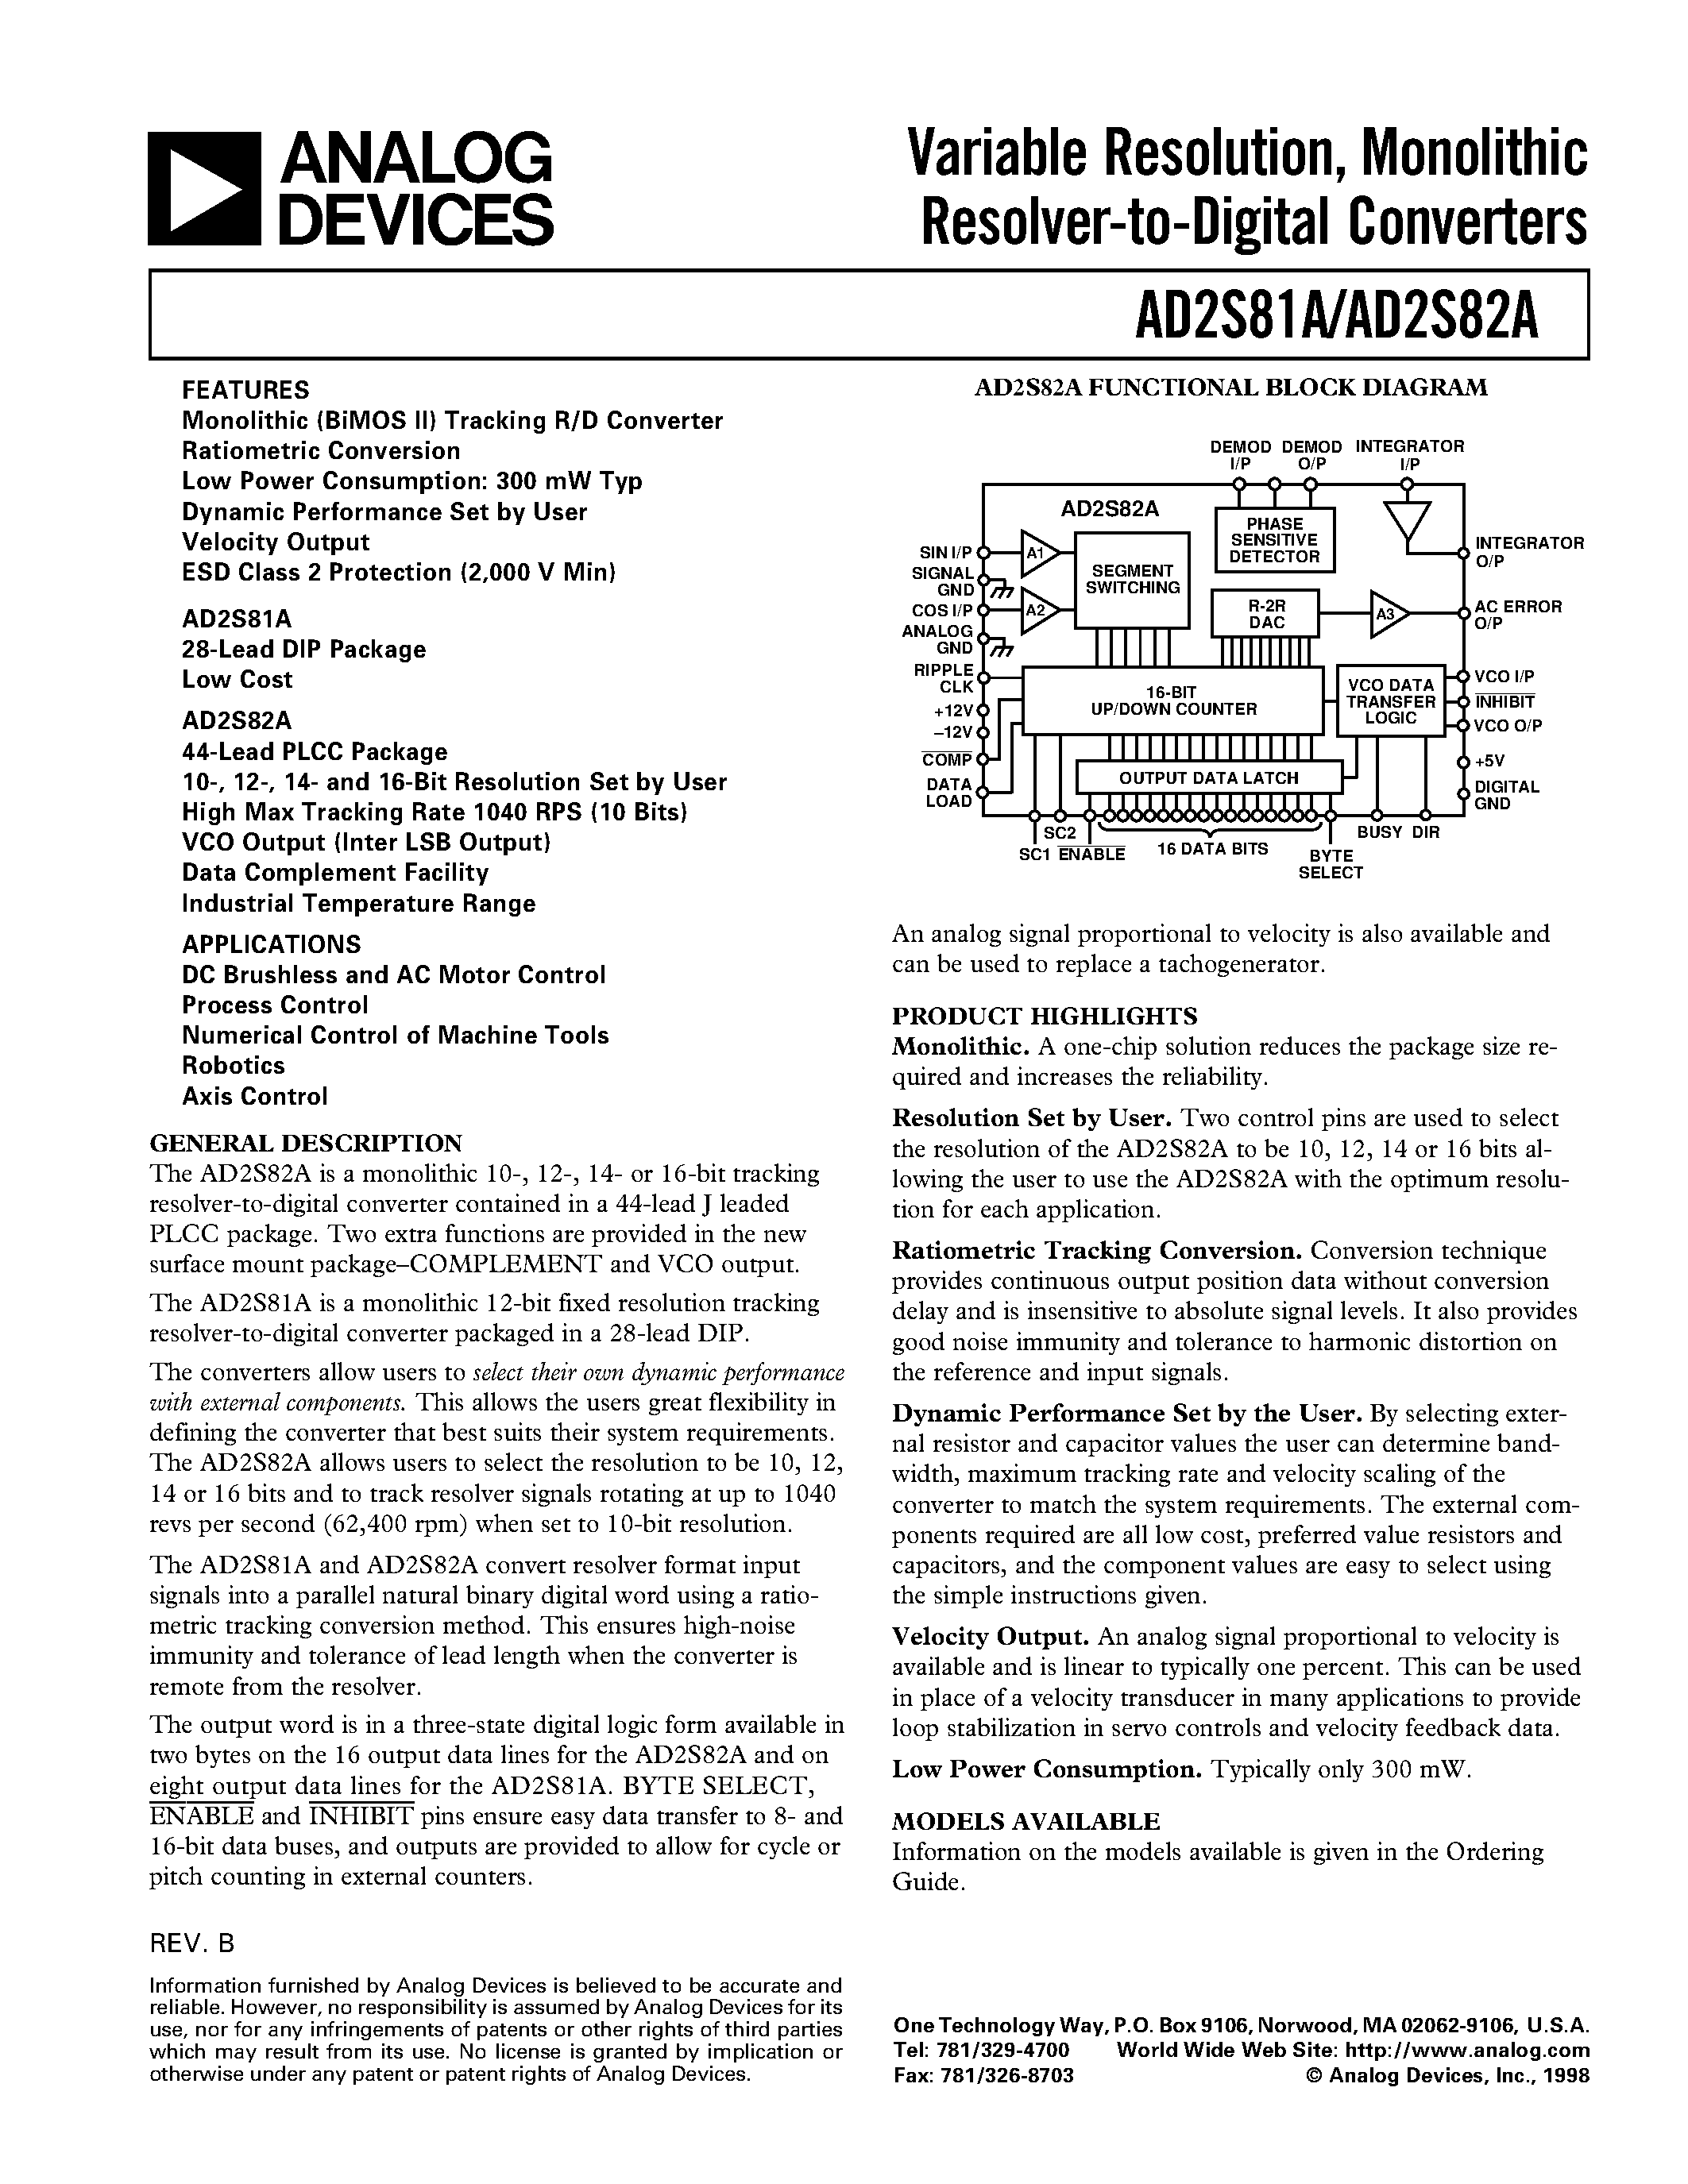 Даташит AD2S81AJD - Variable Resolution/ Monolithic Resolver-to-Digital Converters страница 1